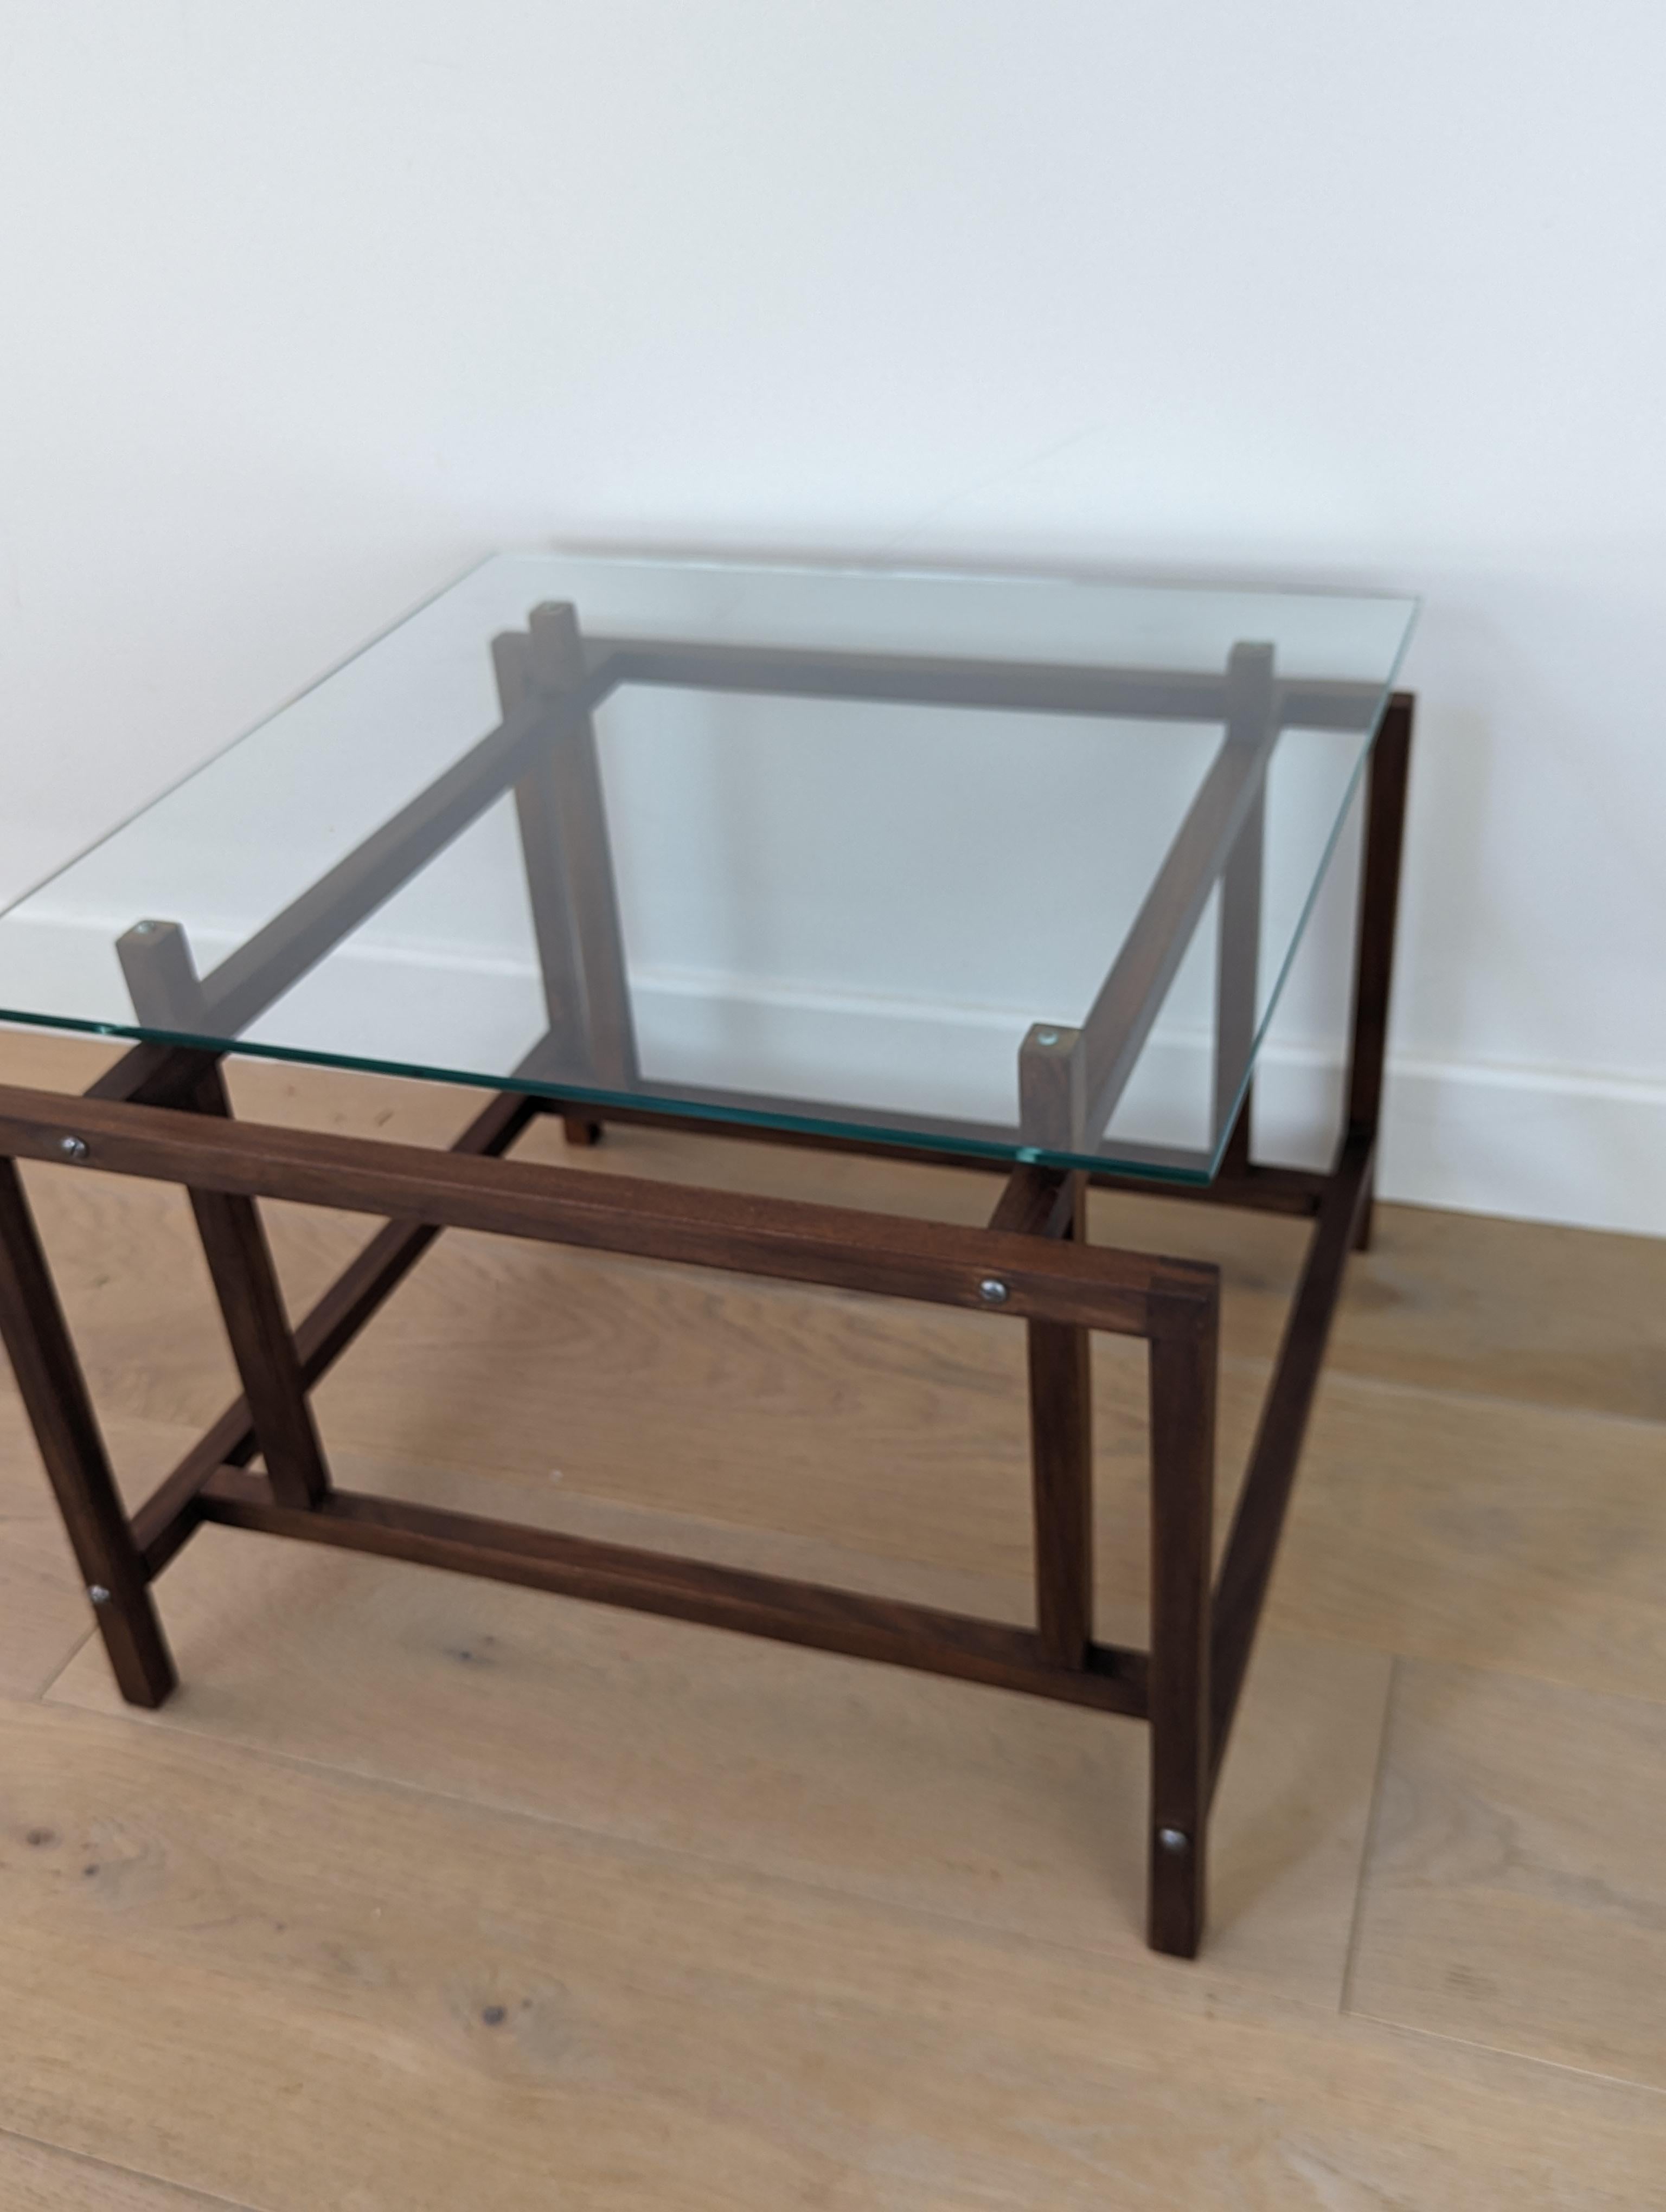 Henning Norgaard for Comfort side table in teak with glass table top For Sale 9